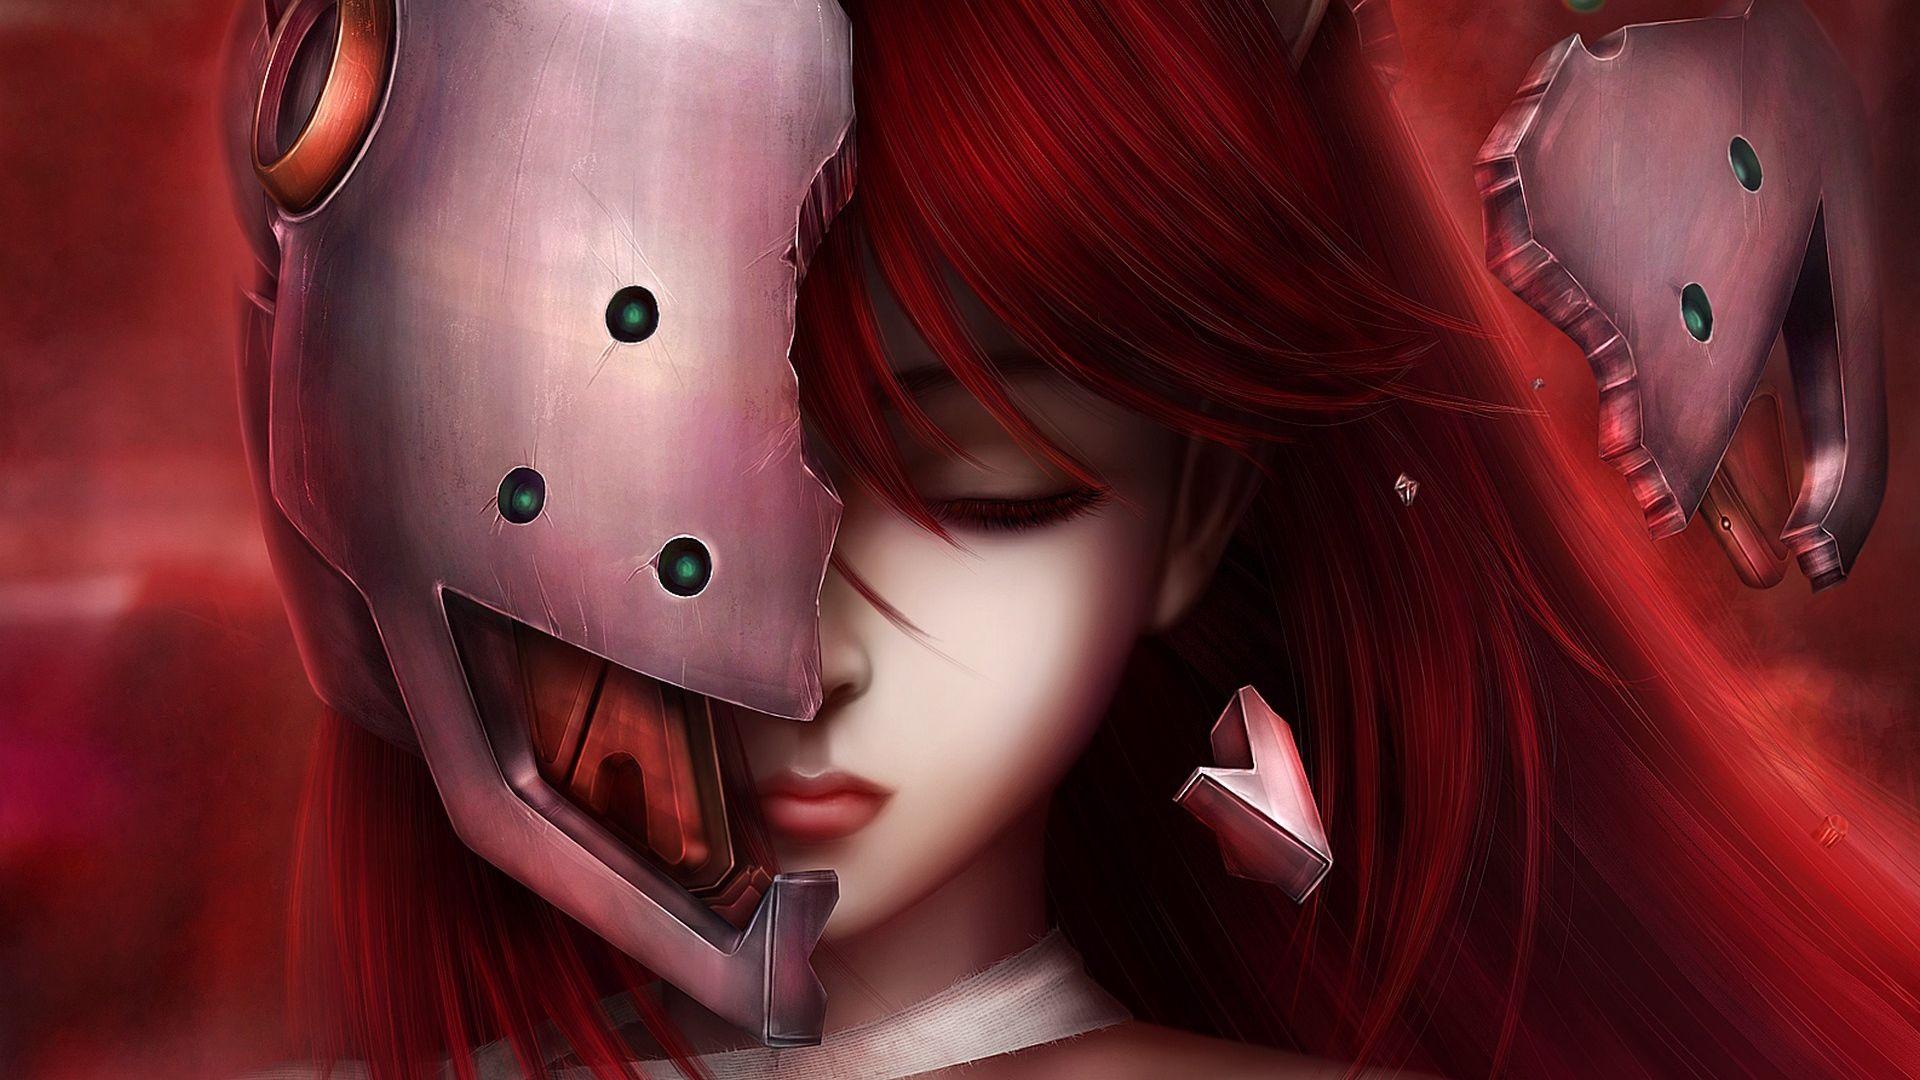 Lucy Elfen Lied Wallpapers HD - Wallpaper Cave